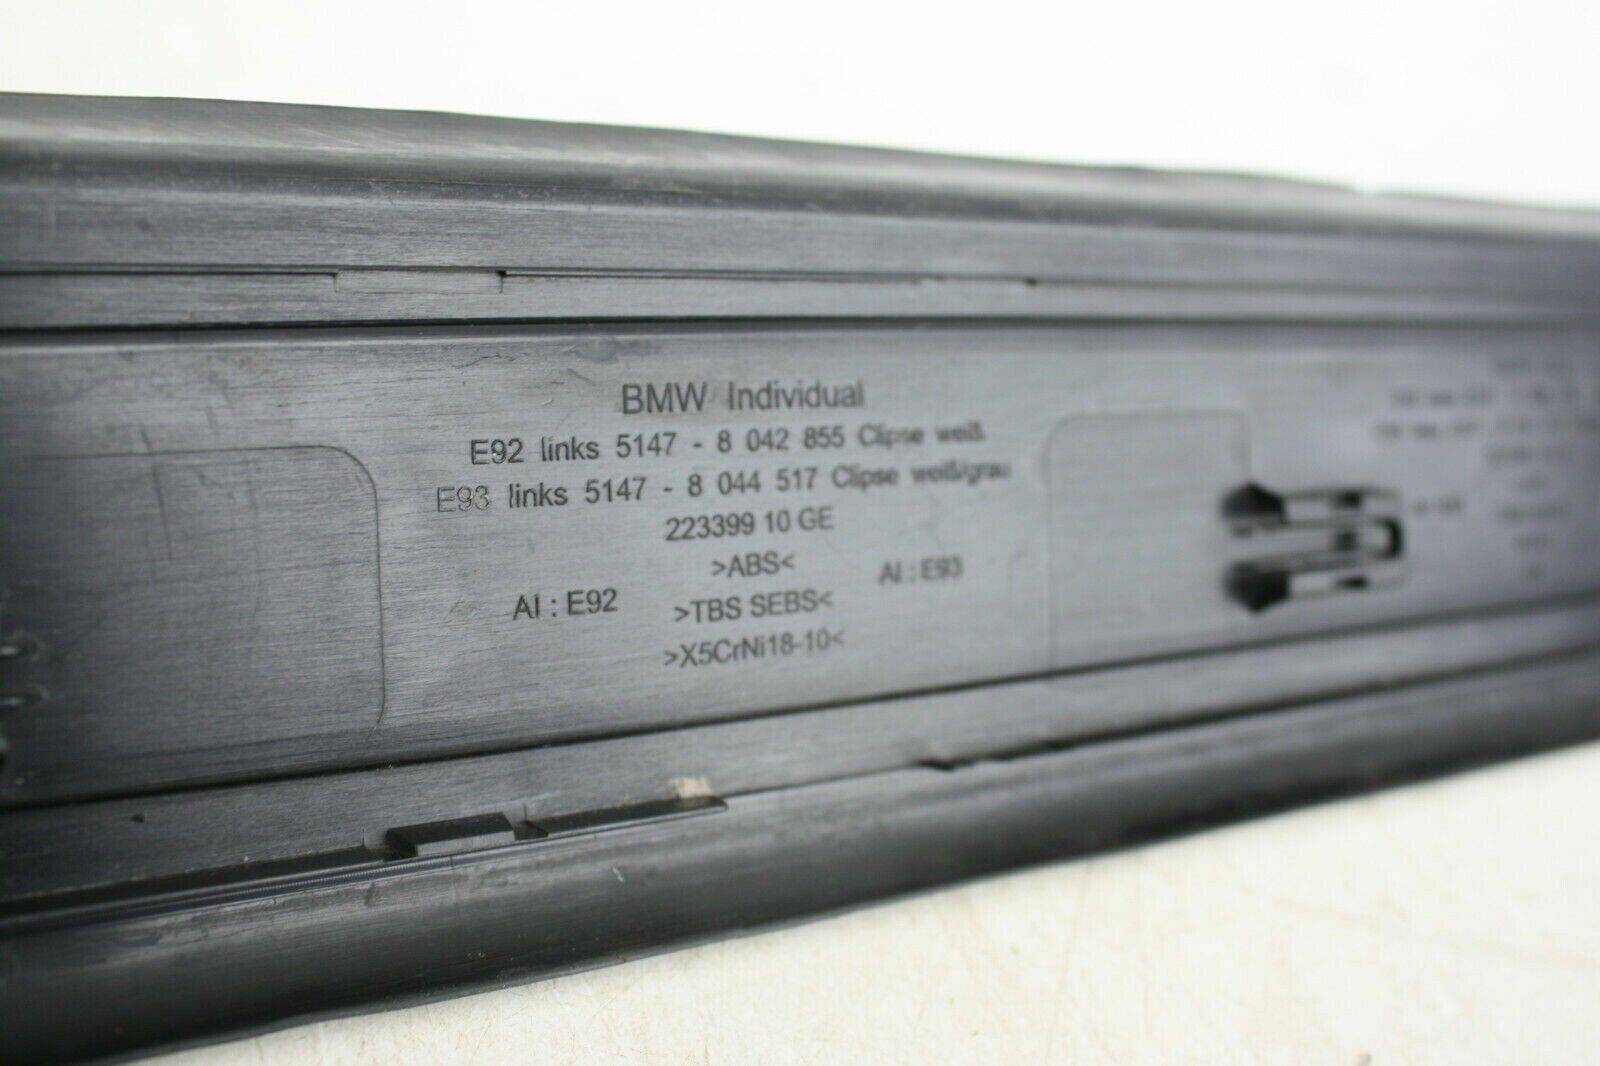 BMW-3-SERIES-FRONT-LEFT-DOOR-ENTRANCE-SILL-STRIP-2006-TO-2010-175431720438-10